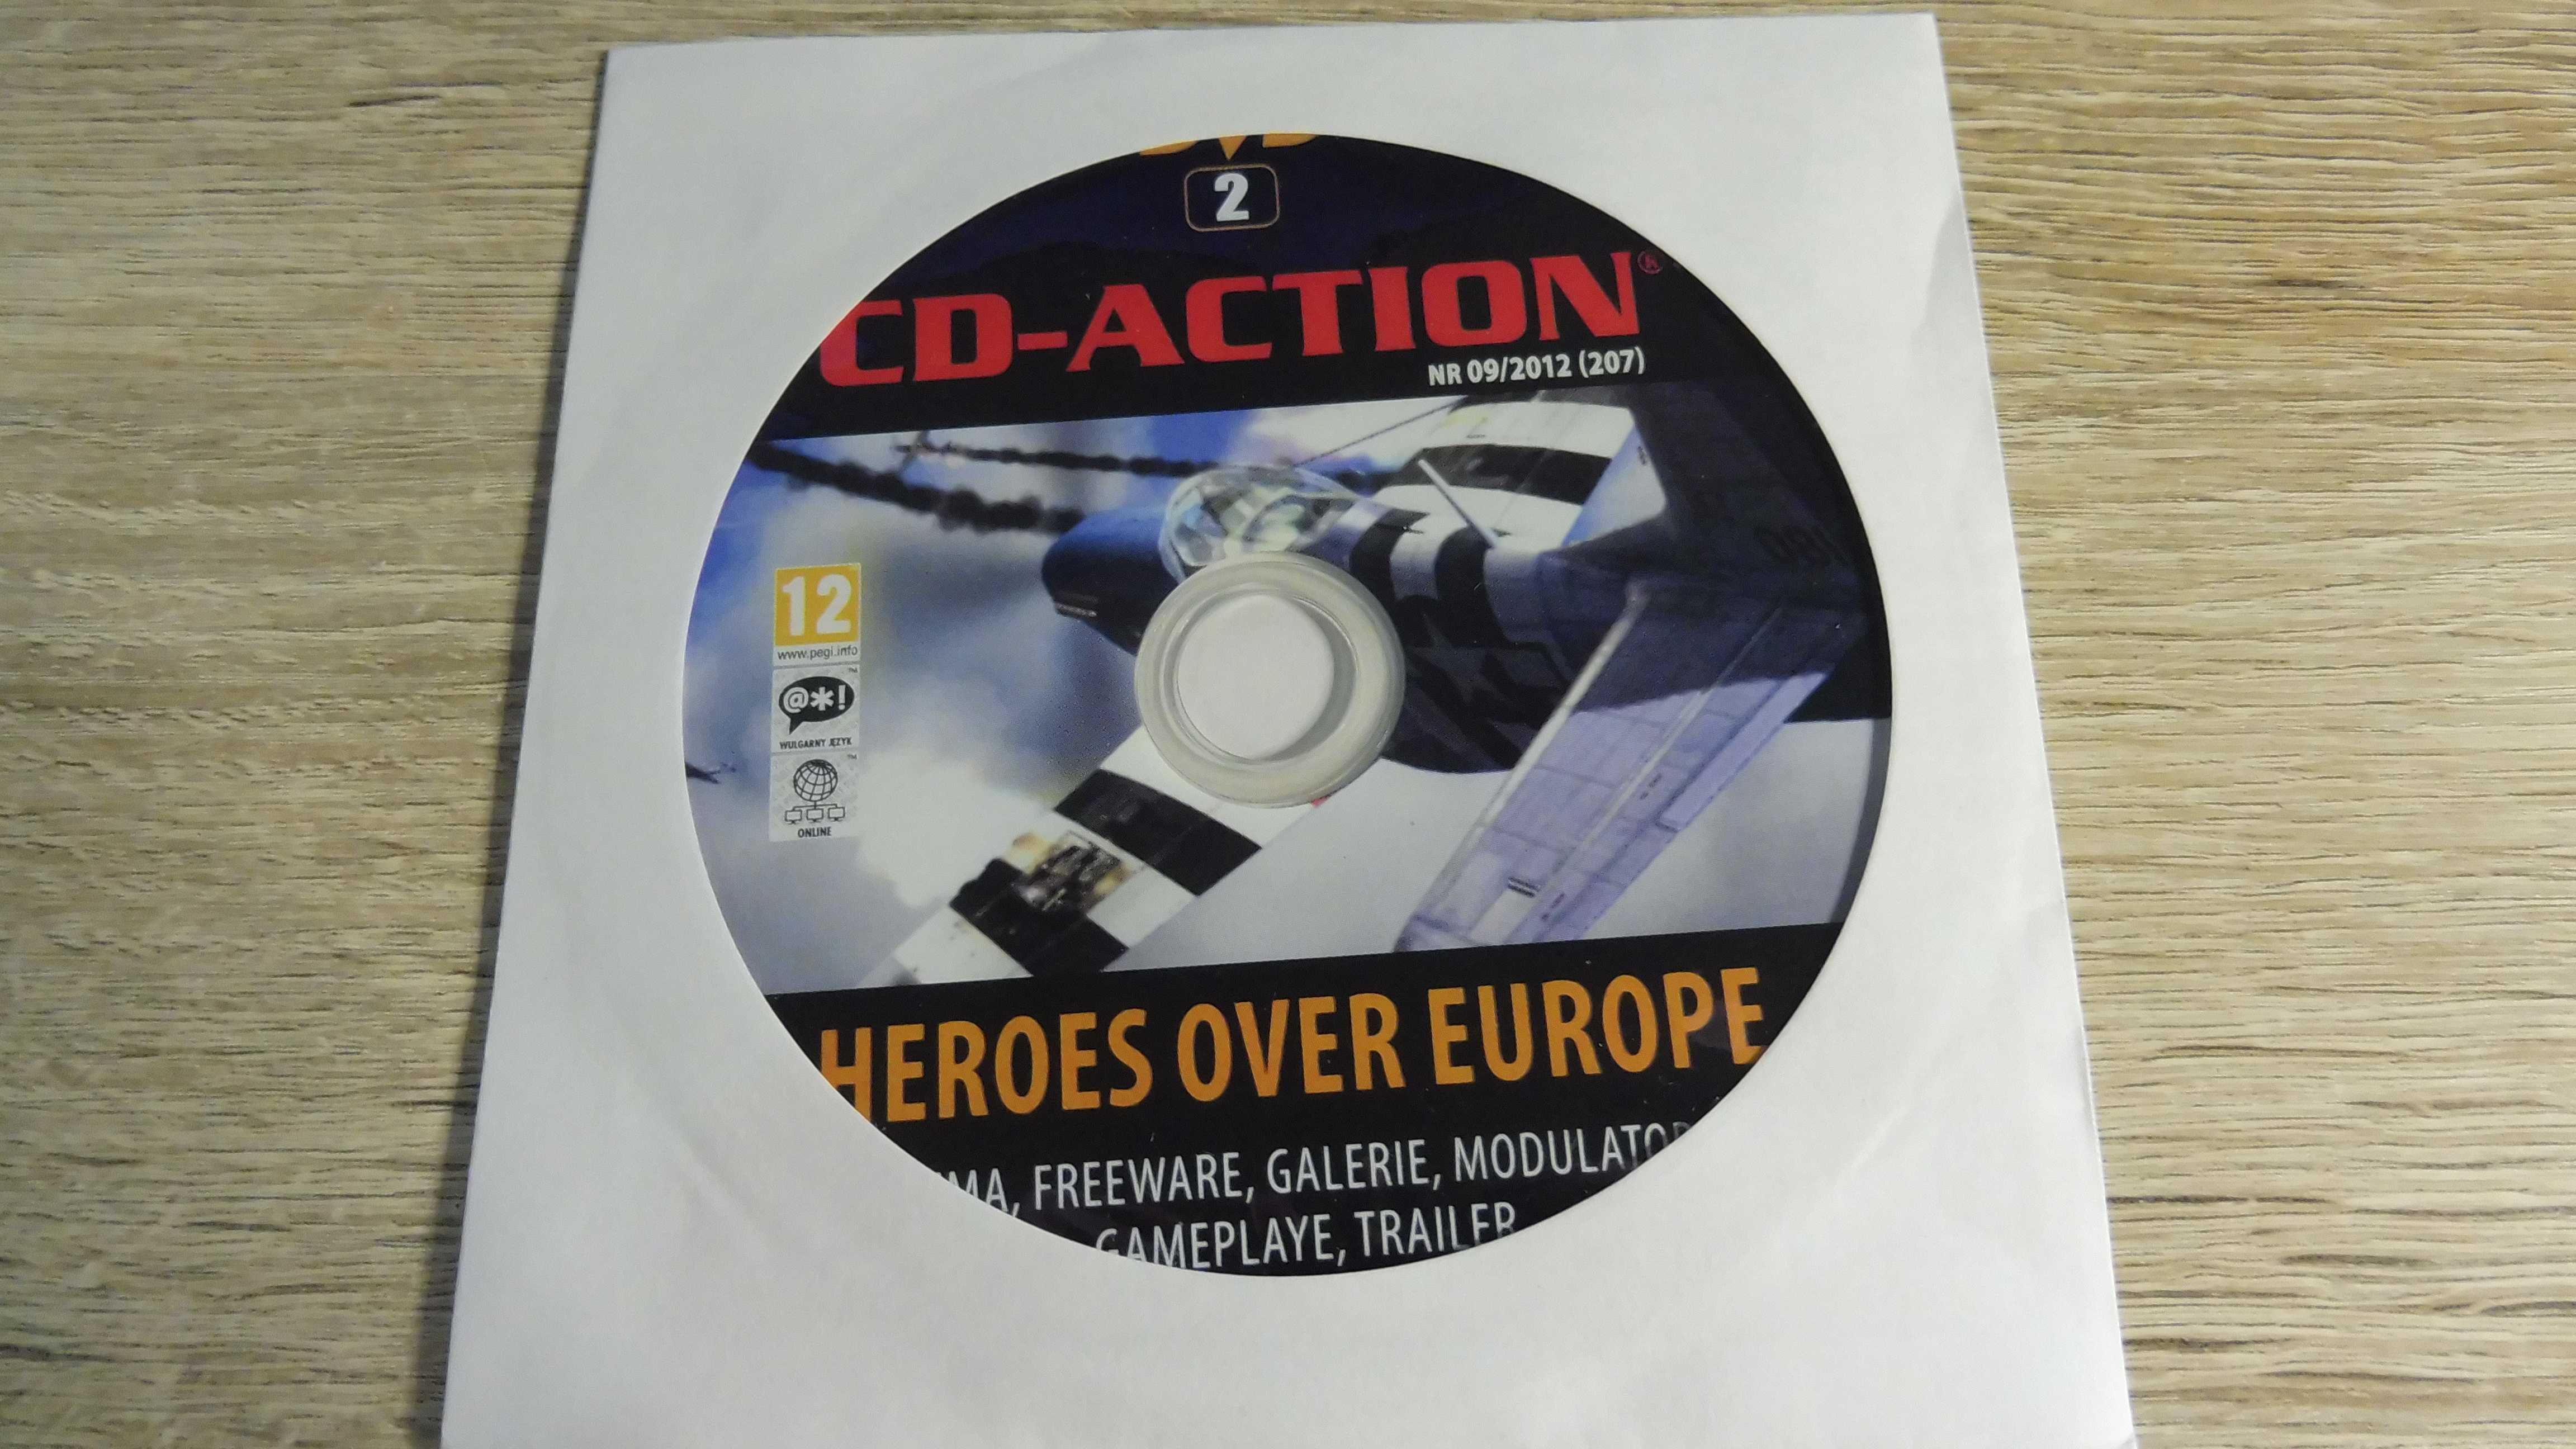 CD Action 09/2012 (207) - DVD 2 - Heroes Over Europe